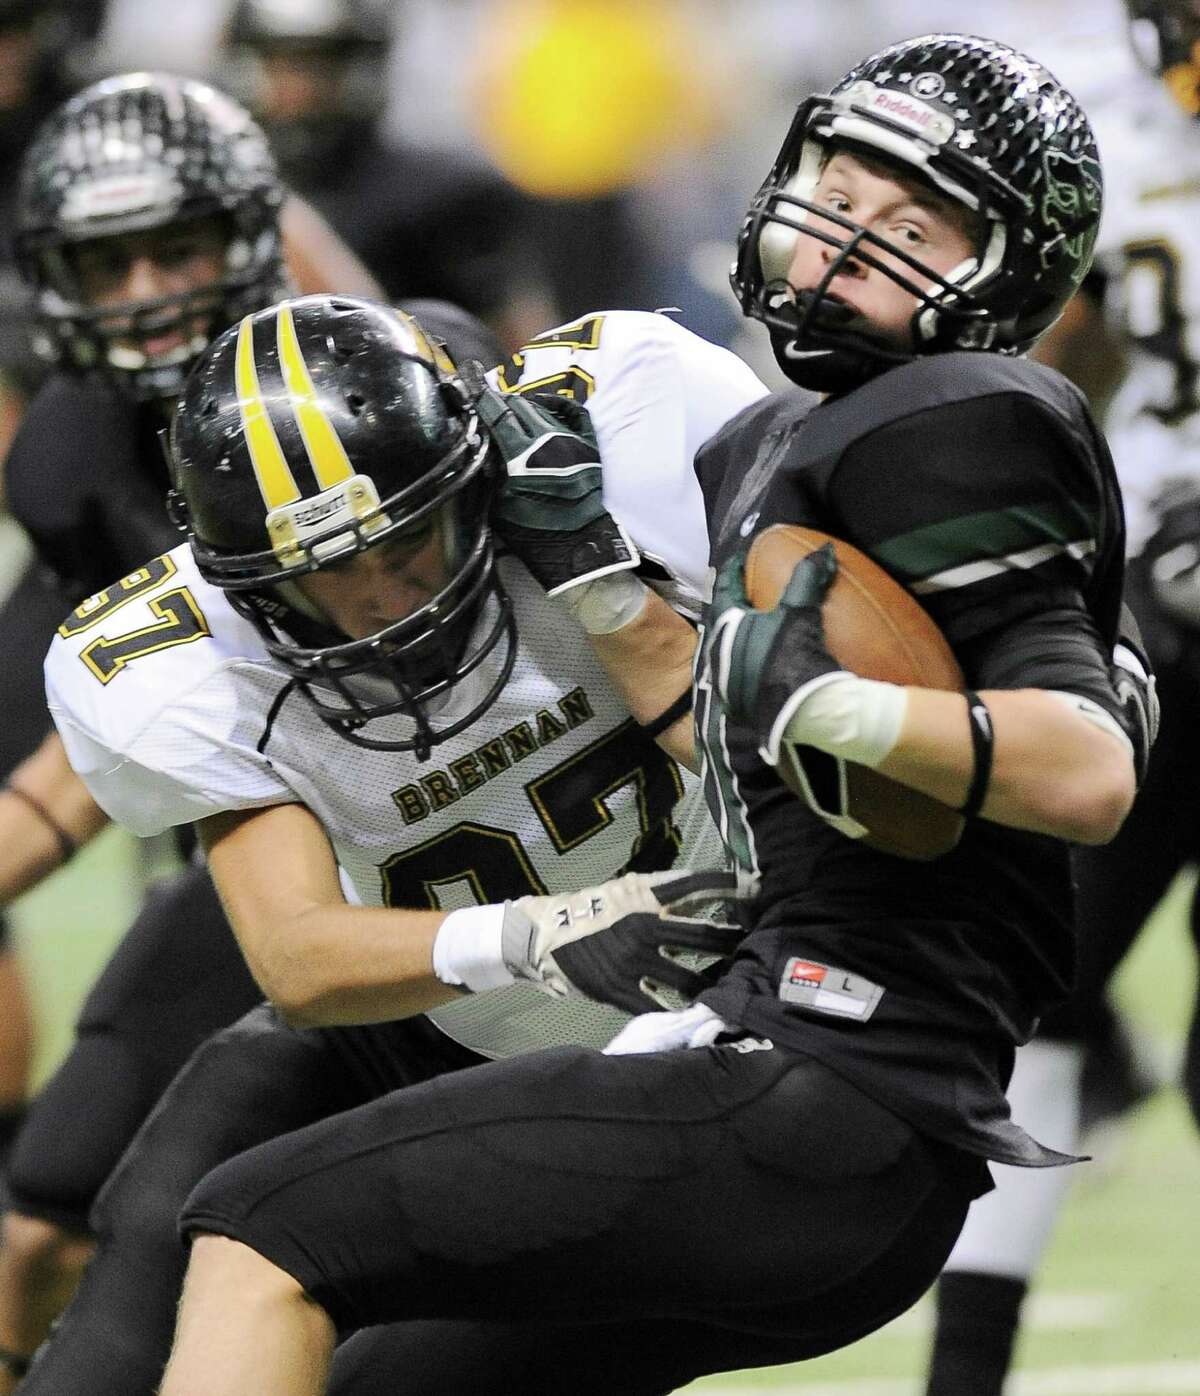 Brennan's James Hamilton, left, tackles Cedar Park's Lane Waller during the first half of a 4A high school football playoff game, Friday, Dec. 7, 2012, at the Alamodome in San Antonio.